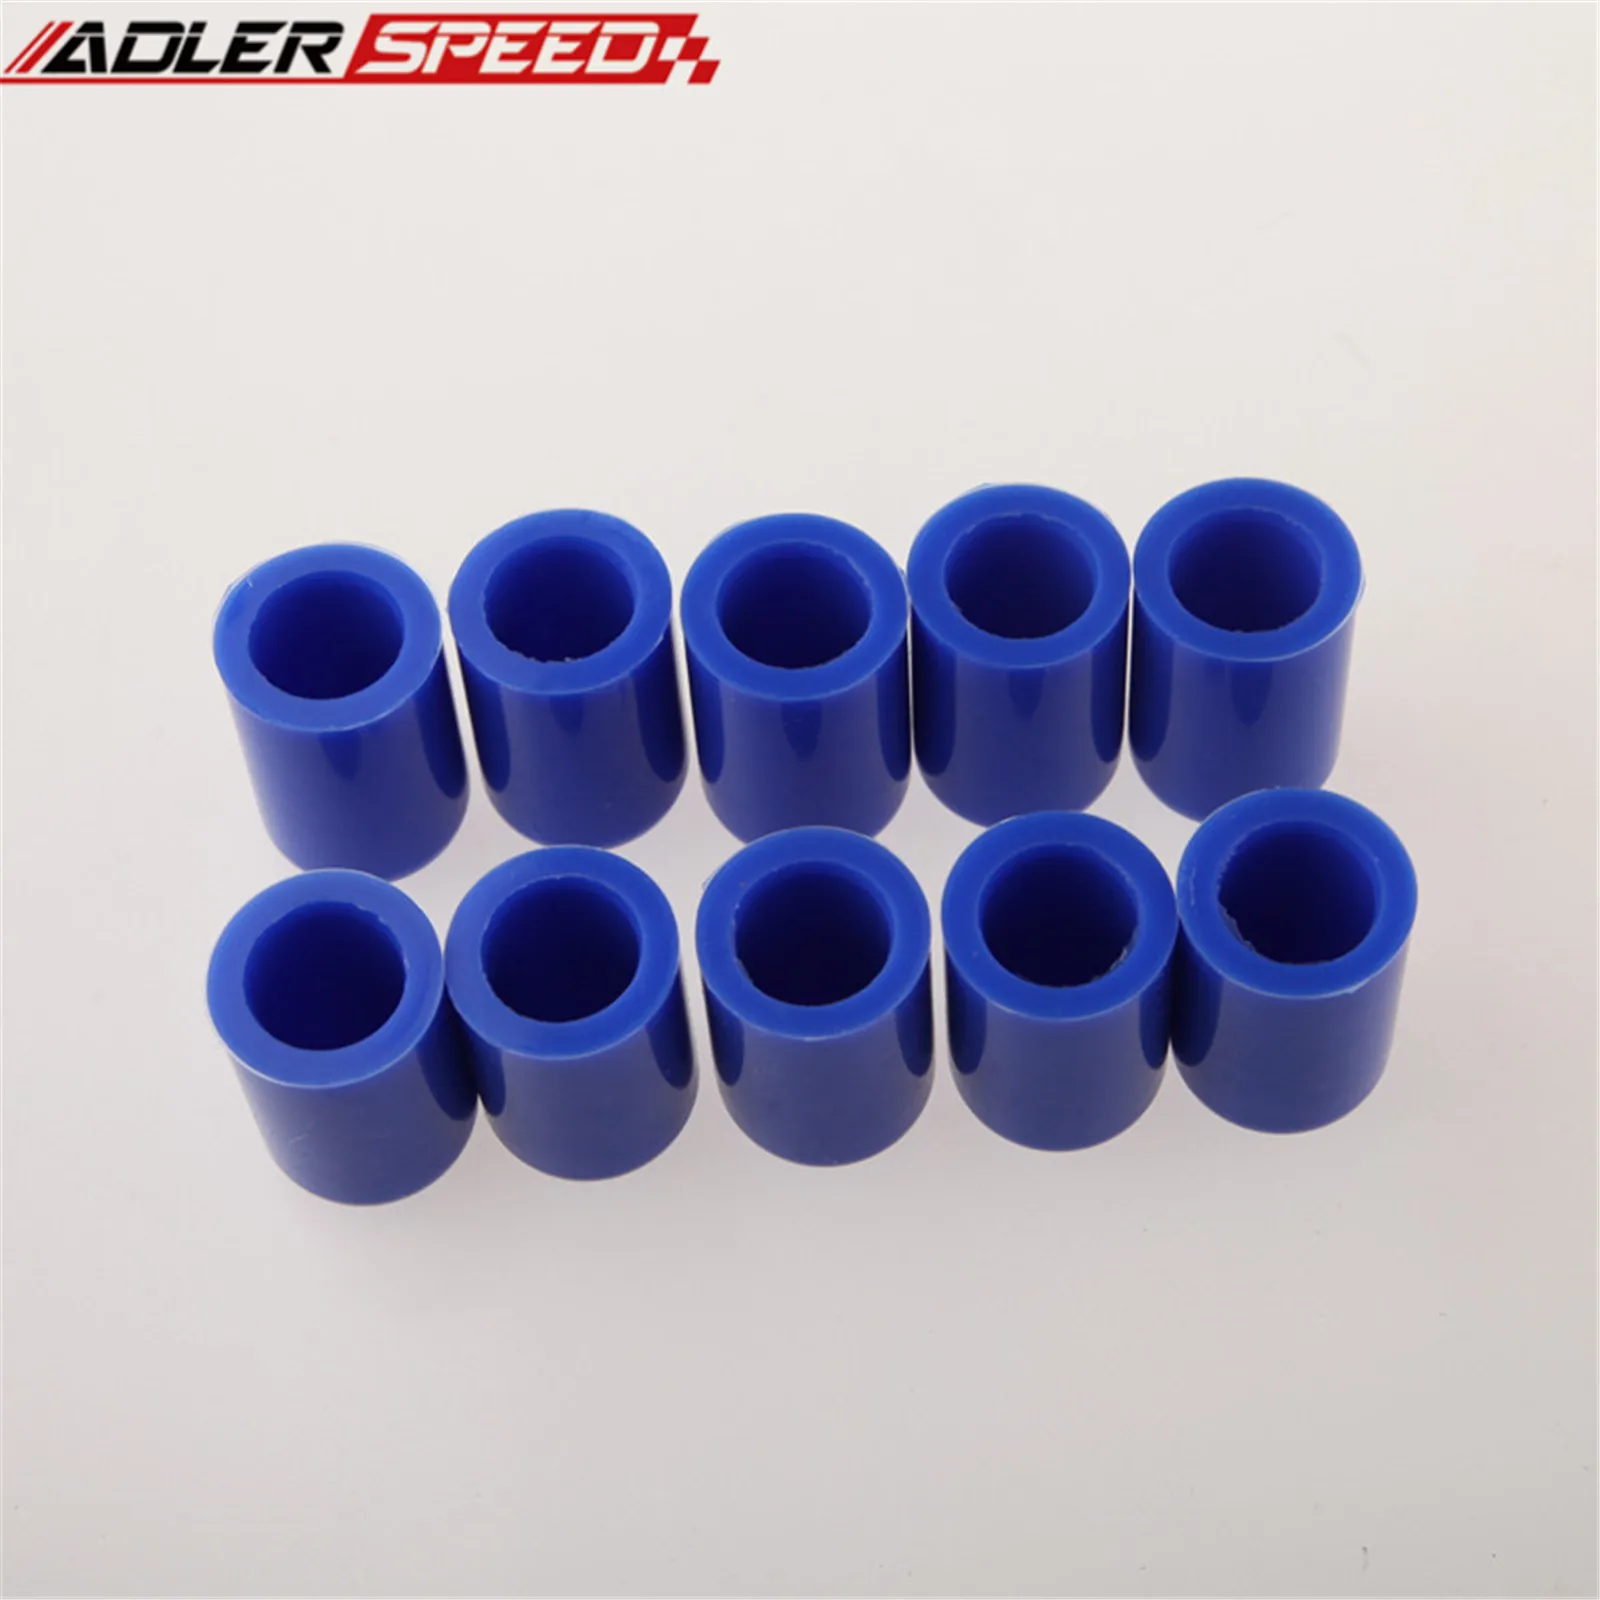 10PCS  4 6 8 10 12 16 19 25 28MM Silicone Vacuum Blanking Cap Air Intake Hose Tube Pipe Ends Bung Plug Black/RED/BLUE